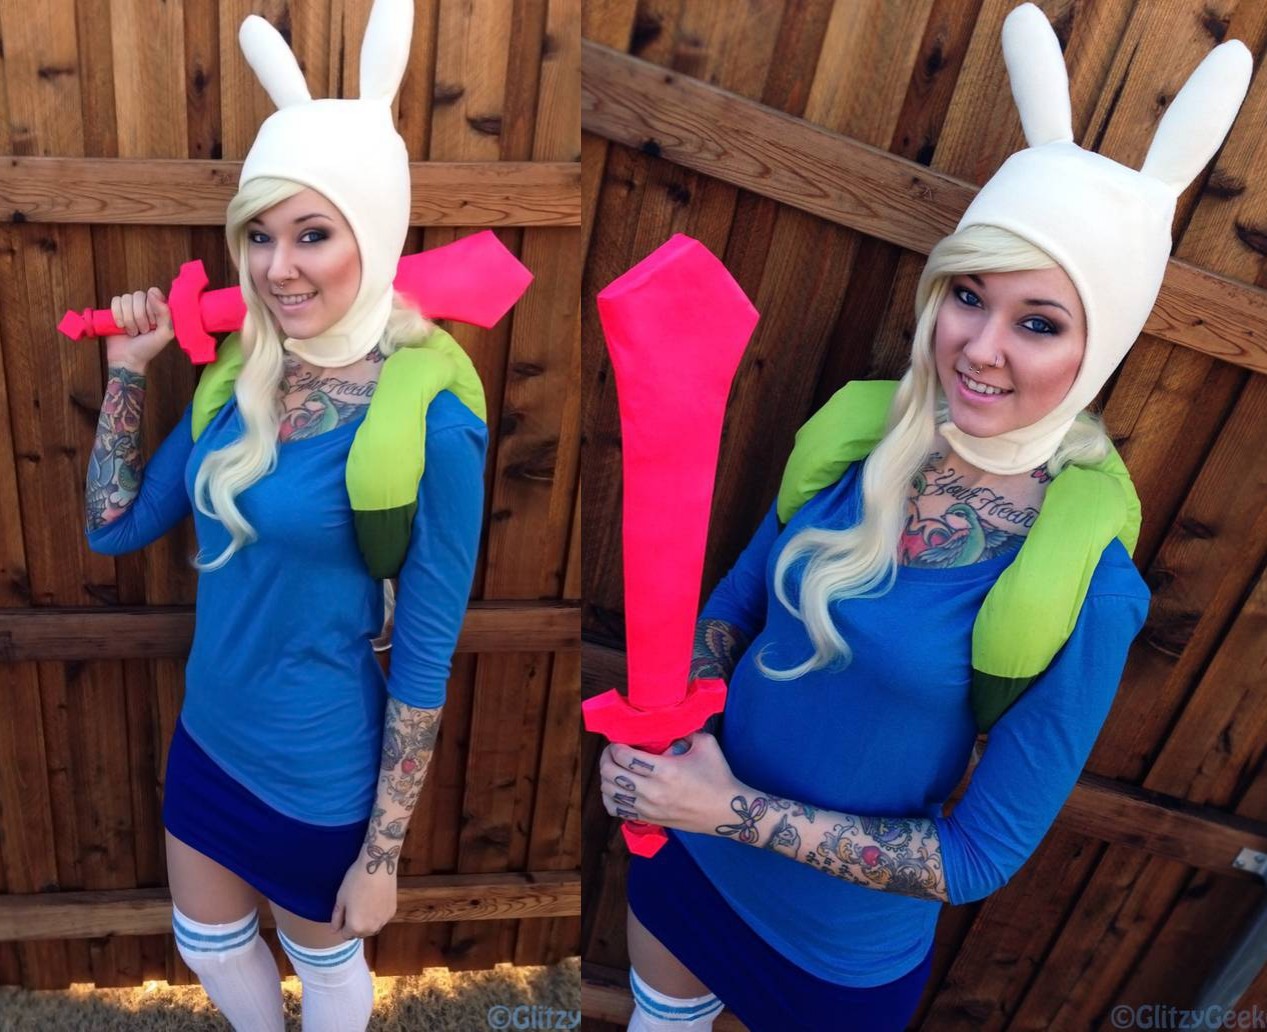 Fionna Cosplay From Adventure Time By Glitzy Geek Gir